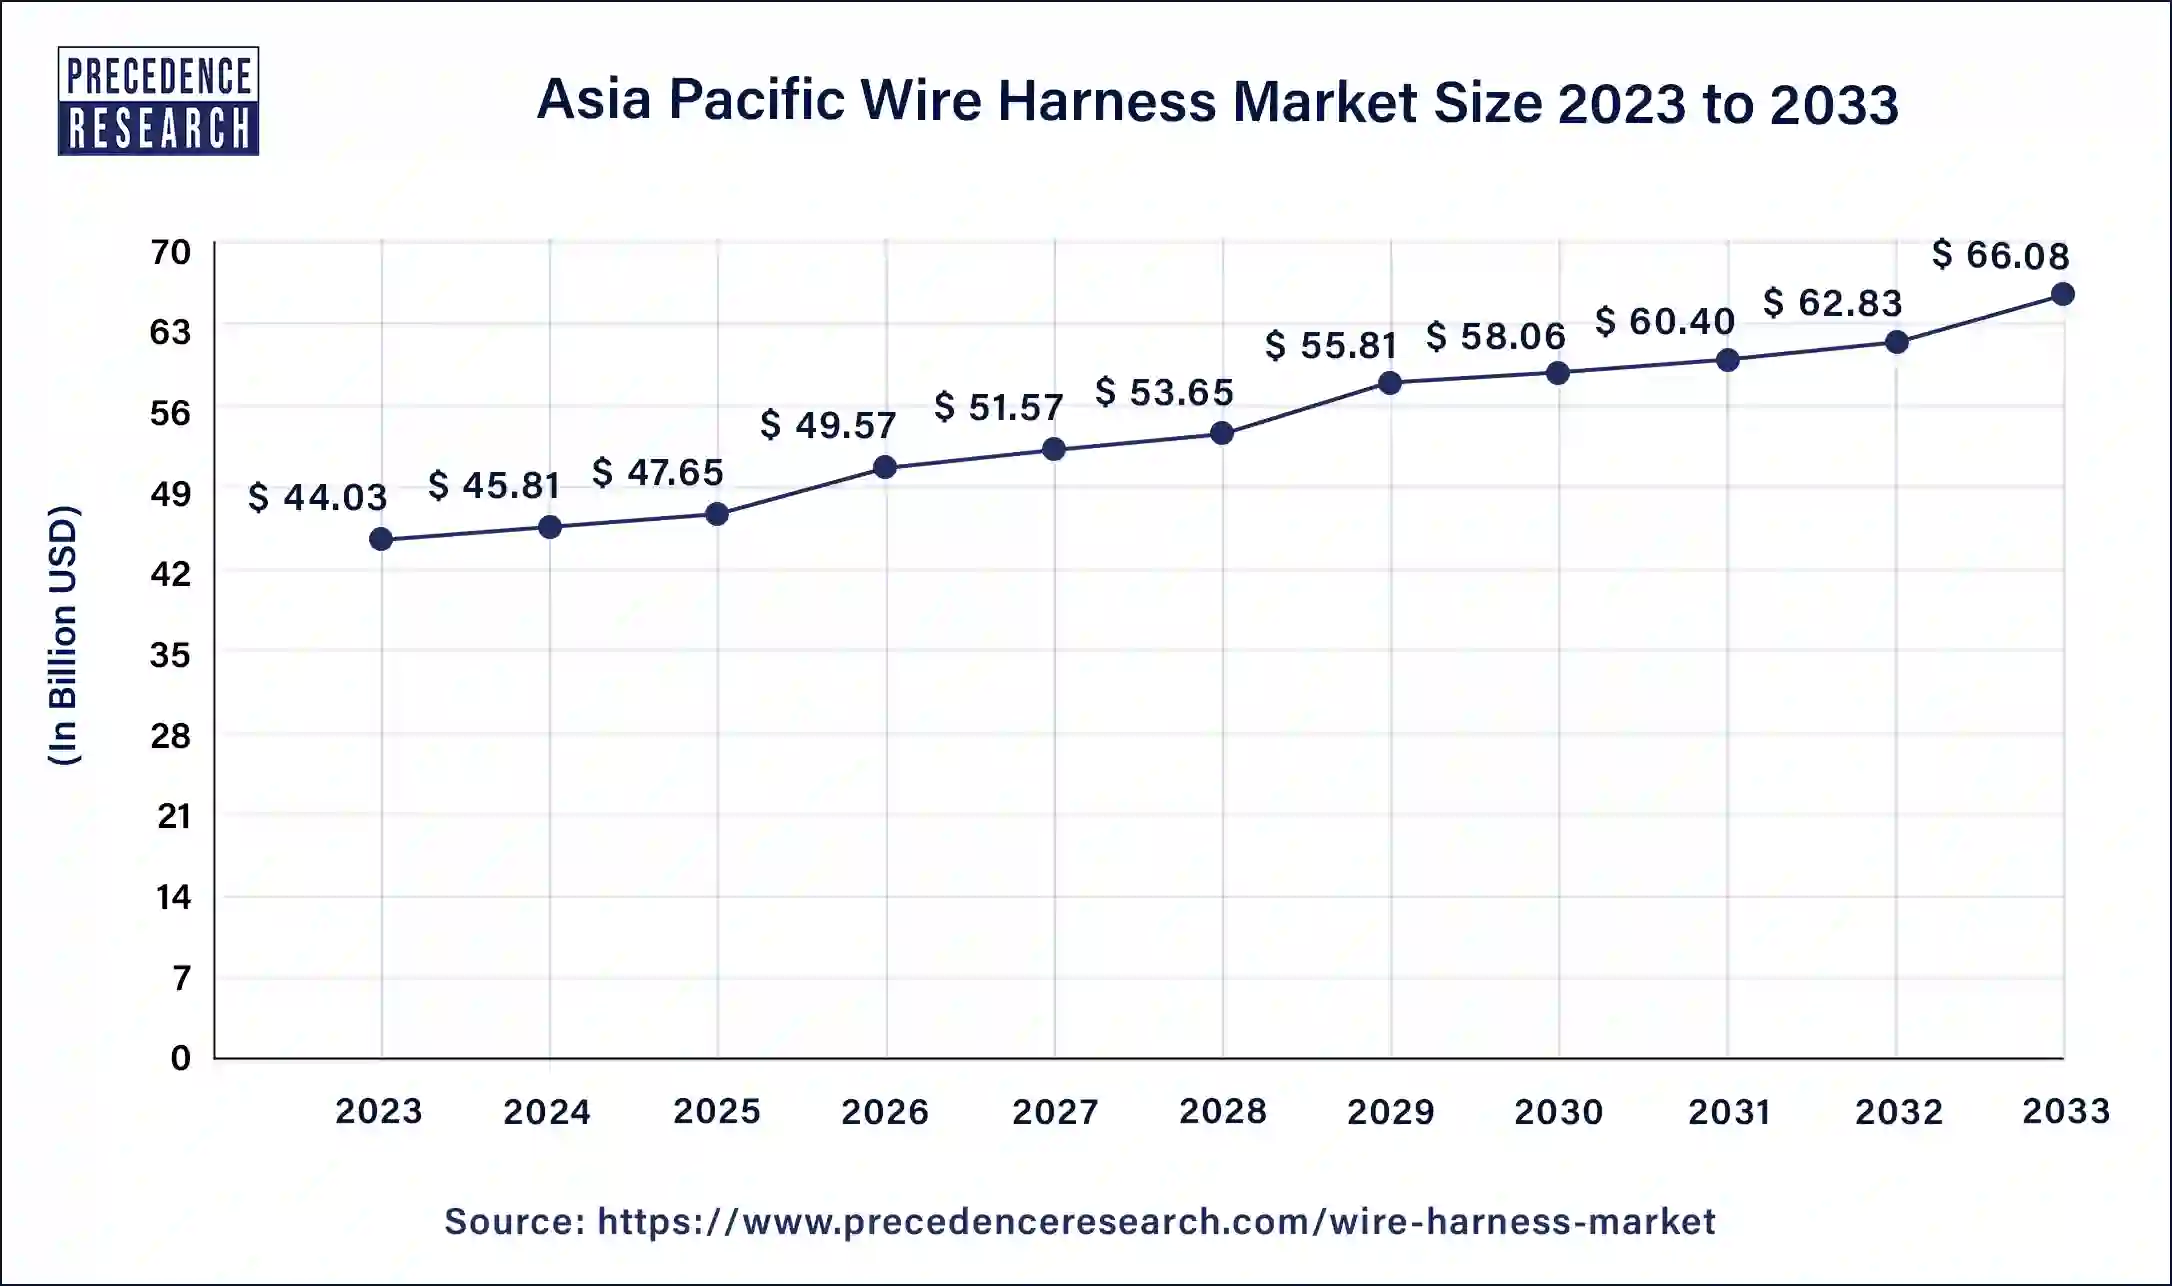 Asia Pacific Wire Harness Market Size 2024 to 2033